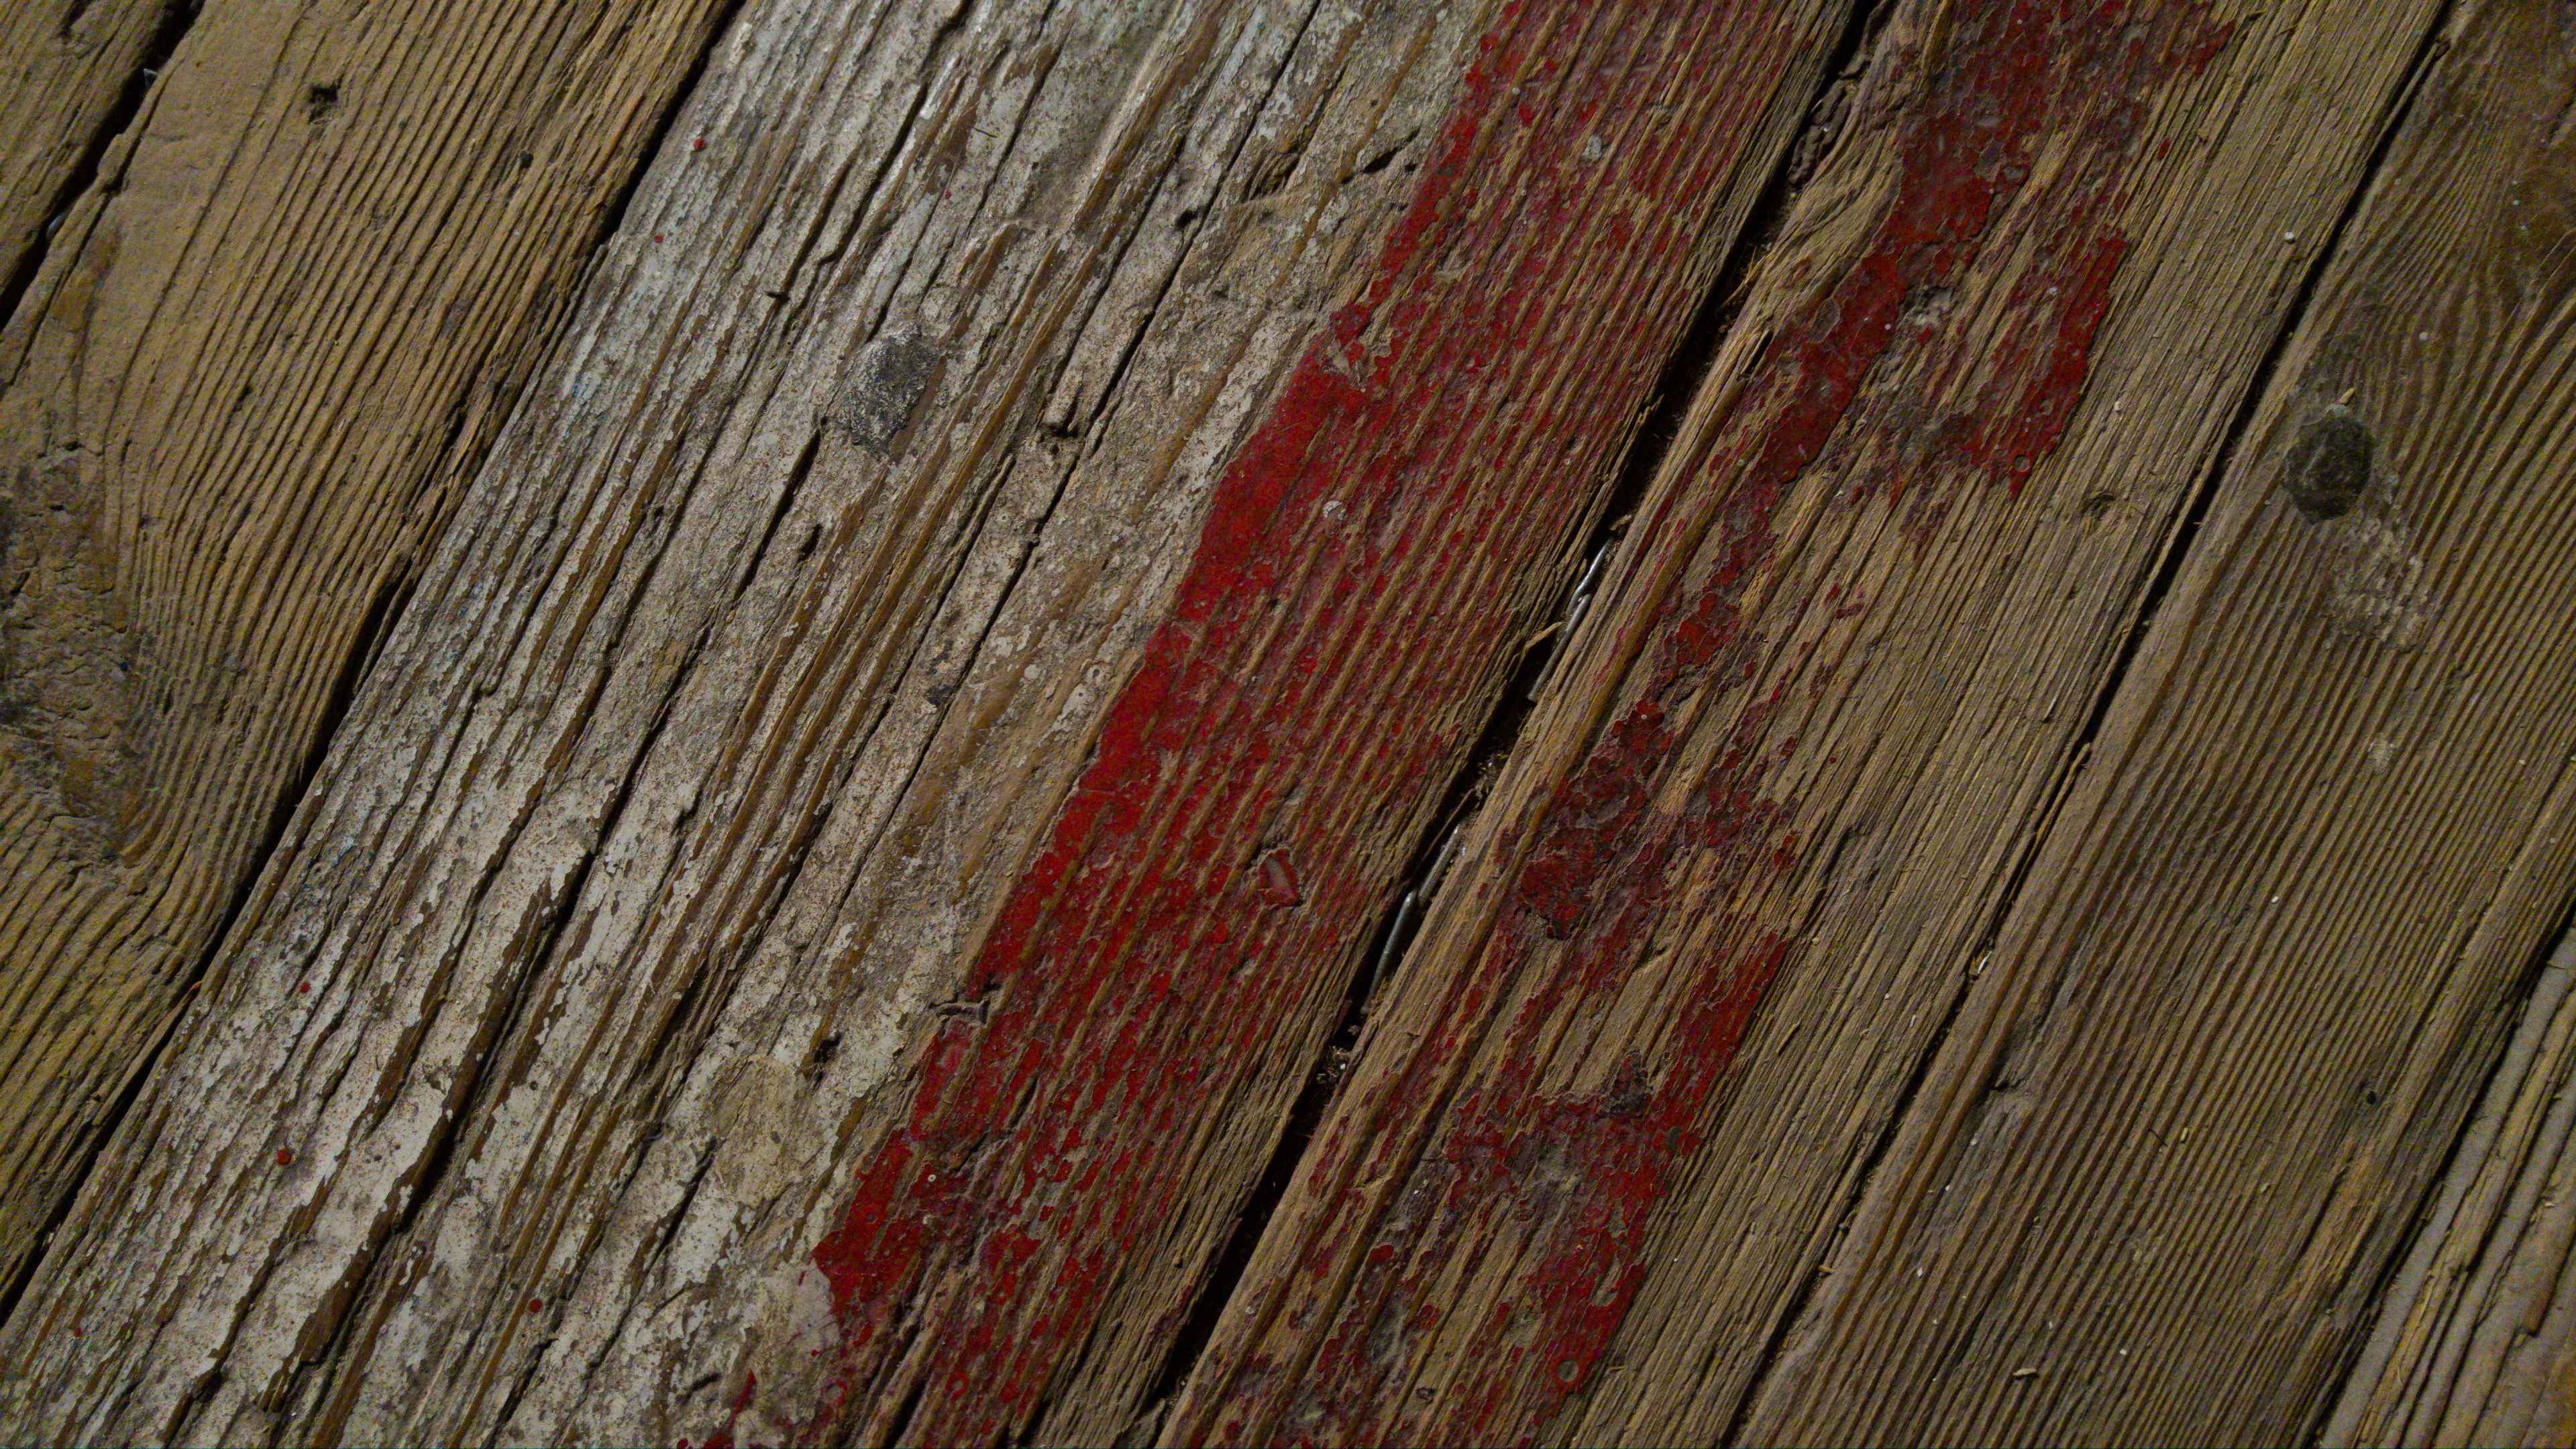 General 3840x2160 wood planks wooden surface 4K